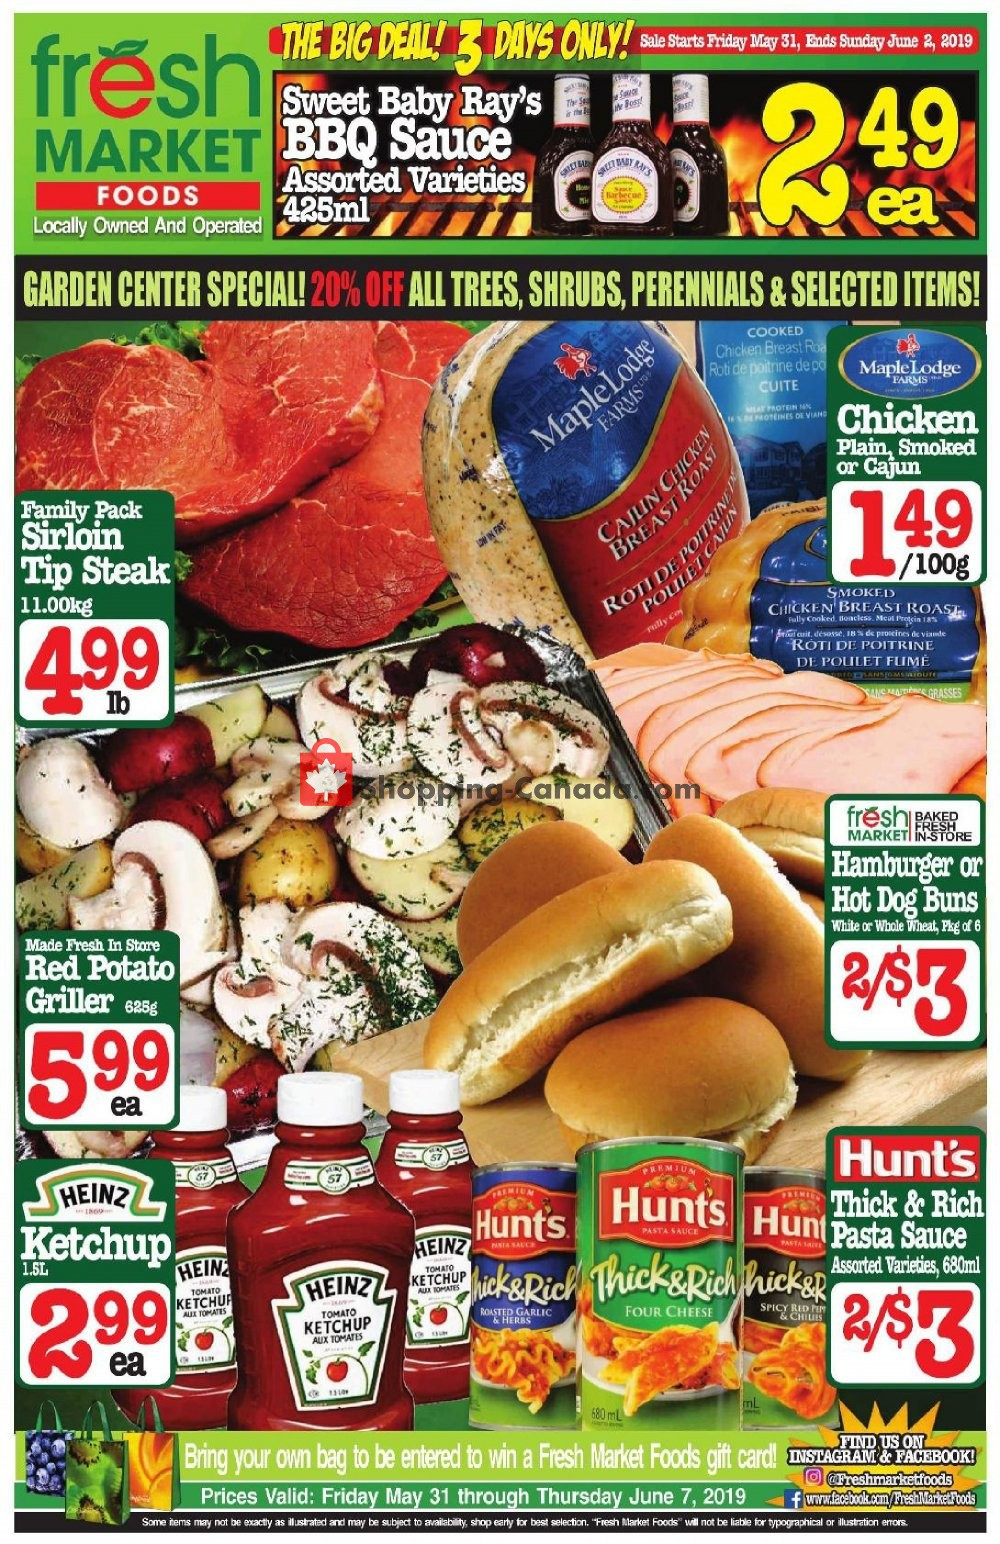 Fresh Market Thanksgiving Dinner 2019
 Flyer and weekly ads Fresh Market Foods Canada Big